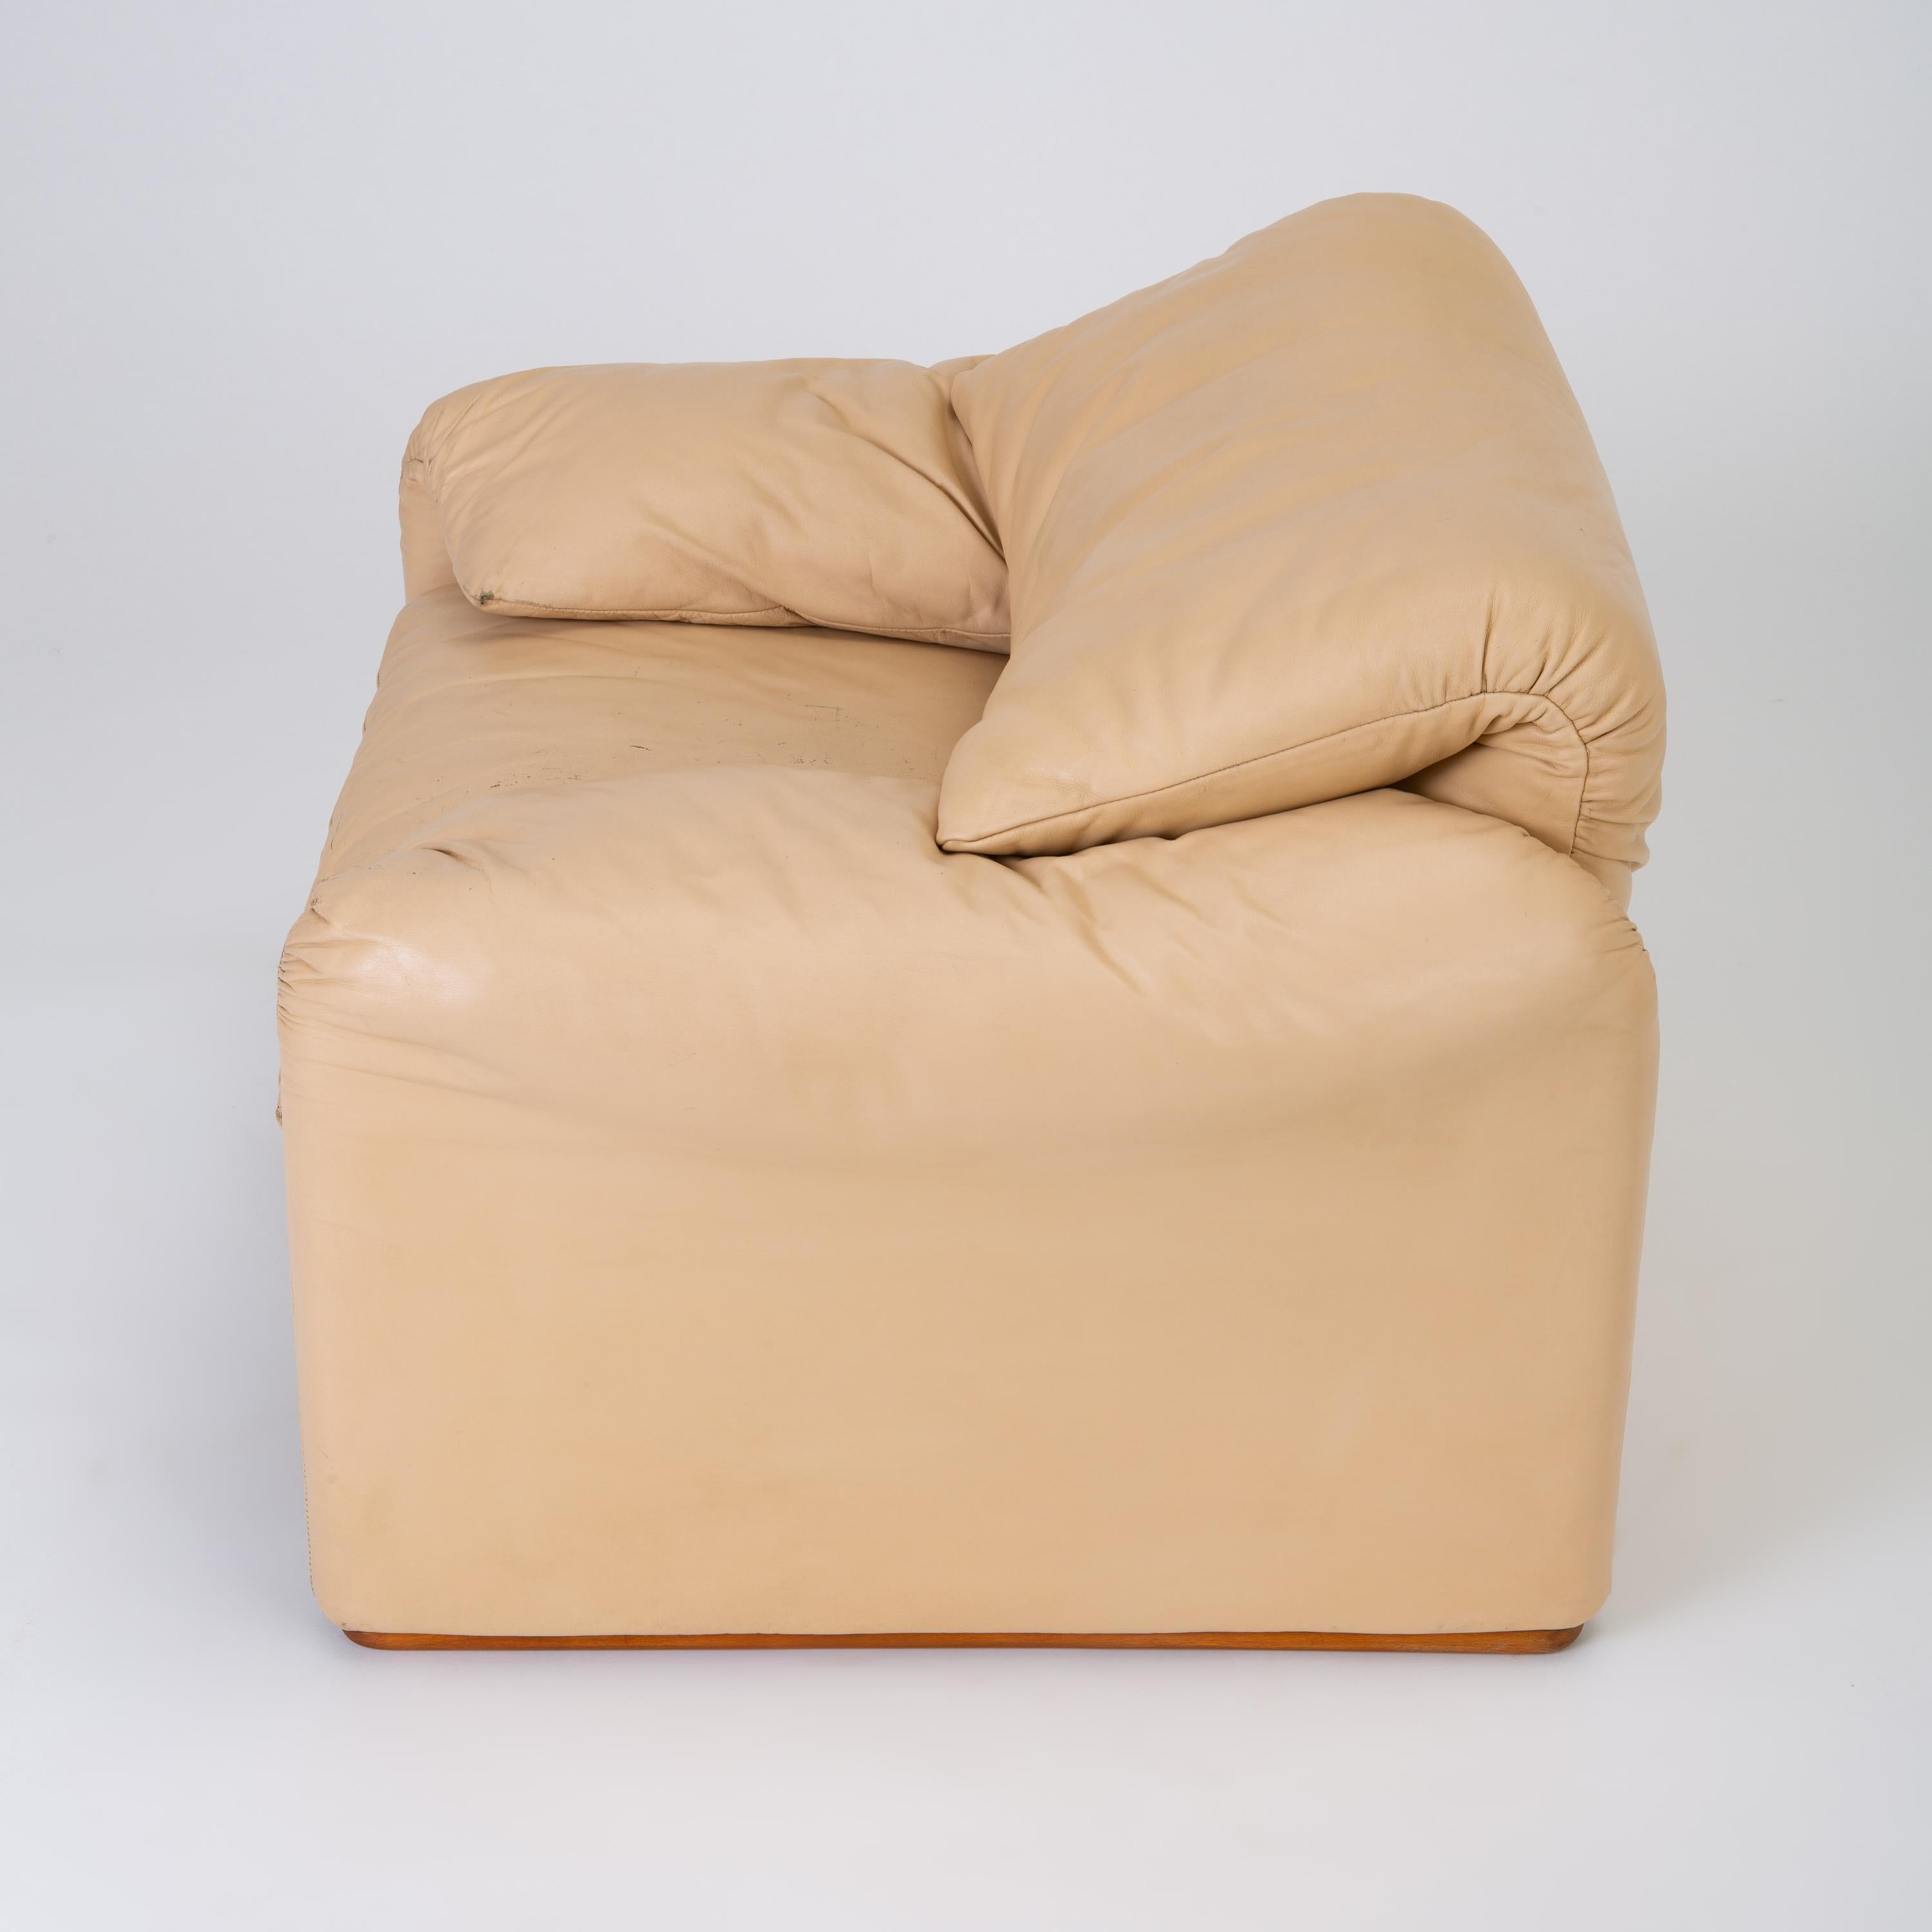 Leather “Maralunga” Chair by Vico Magistretti for Cassina 4